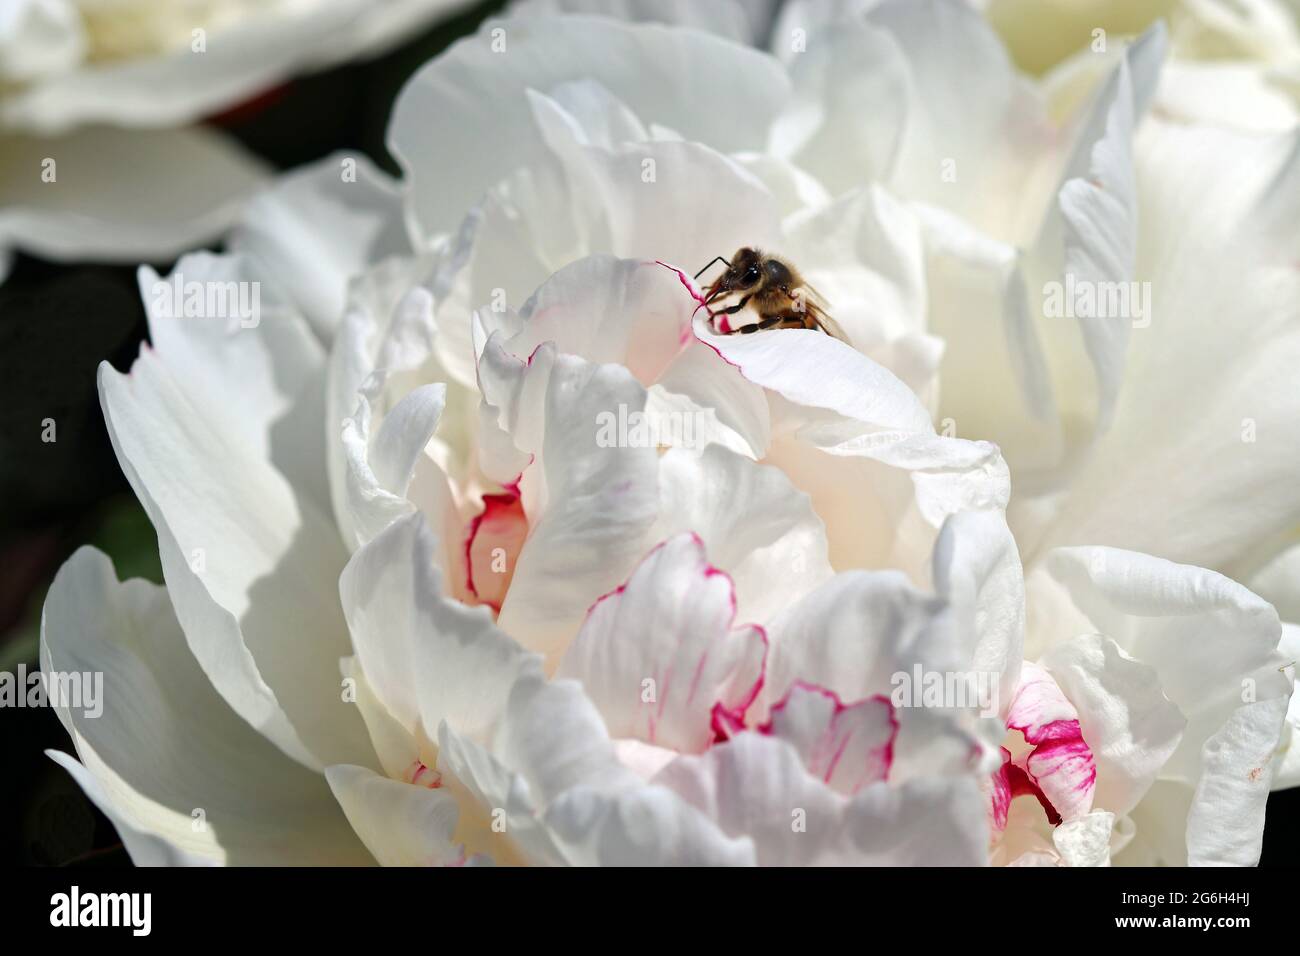 A honey bee struggles to climb out of the giant white ruffled bloom of a Paeonia (peony) Lactiflora (milk white flowers) 'Festiva Maxima' Stock Photo